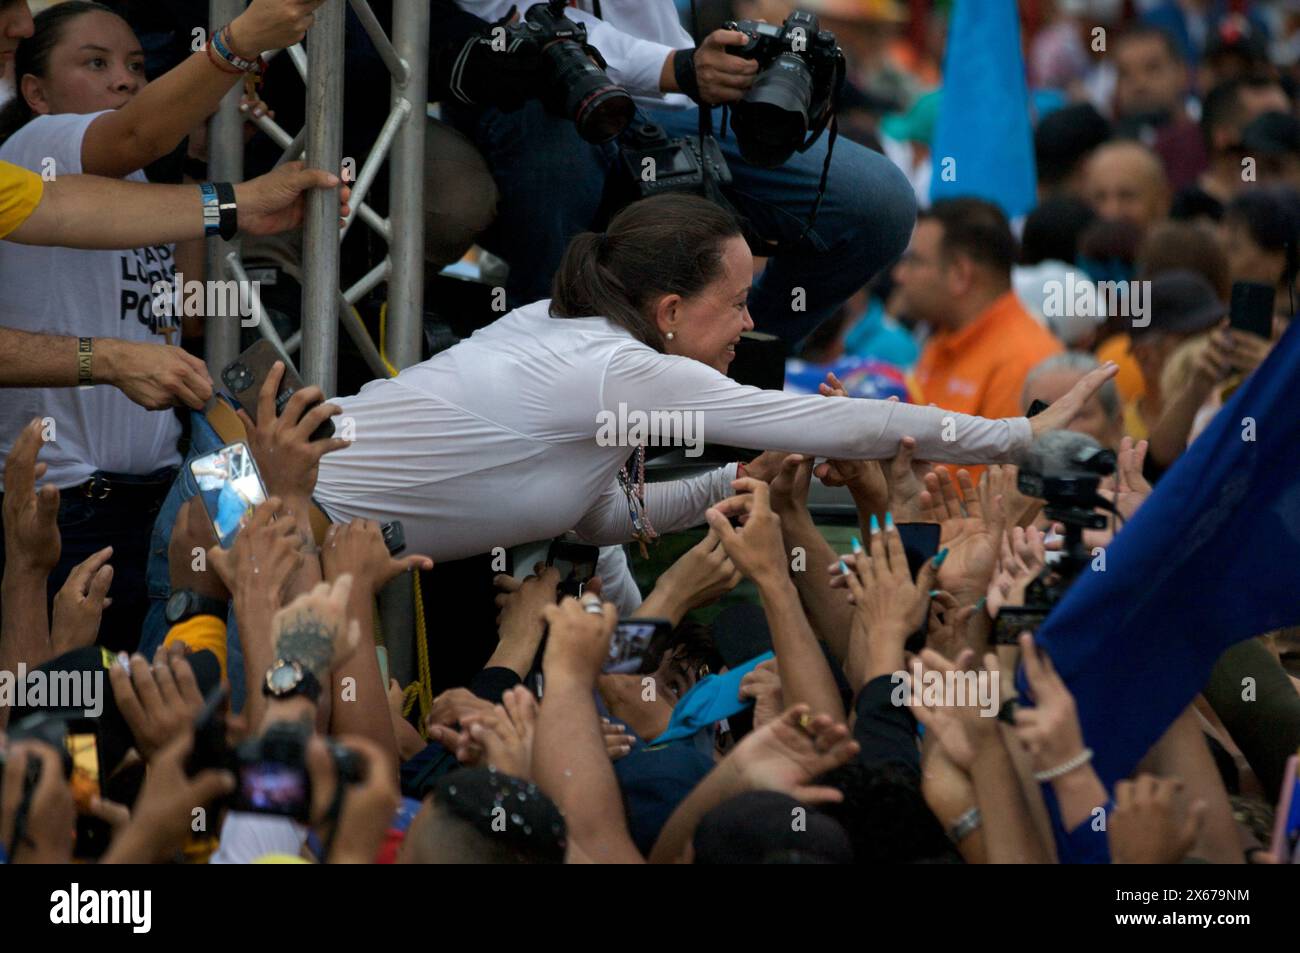 Maracaibo,Venezuela. 02-05-2024. Maria Corina Machado, attends a rally with her followers during a campaign of elections in Vzla  Photo By: Jose Bula. Stock Photo